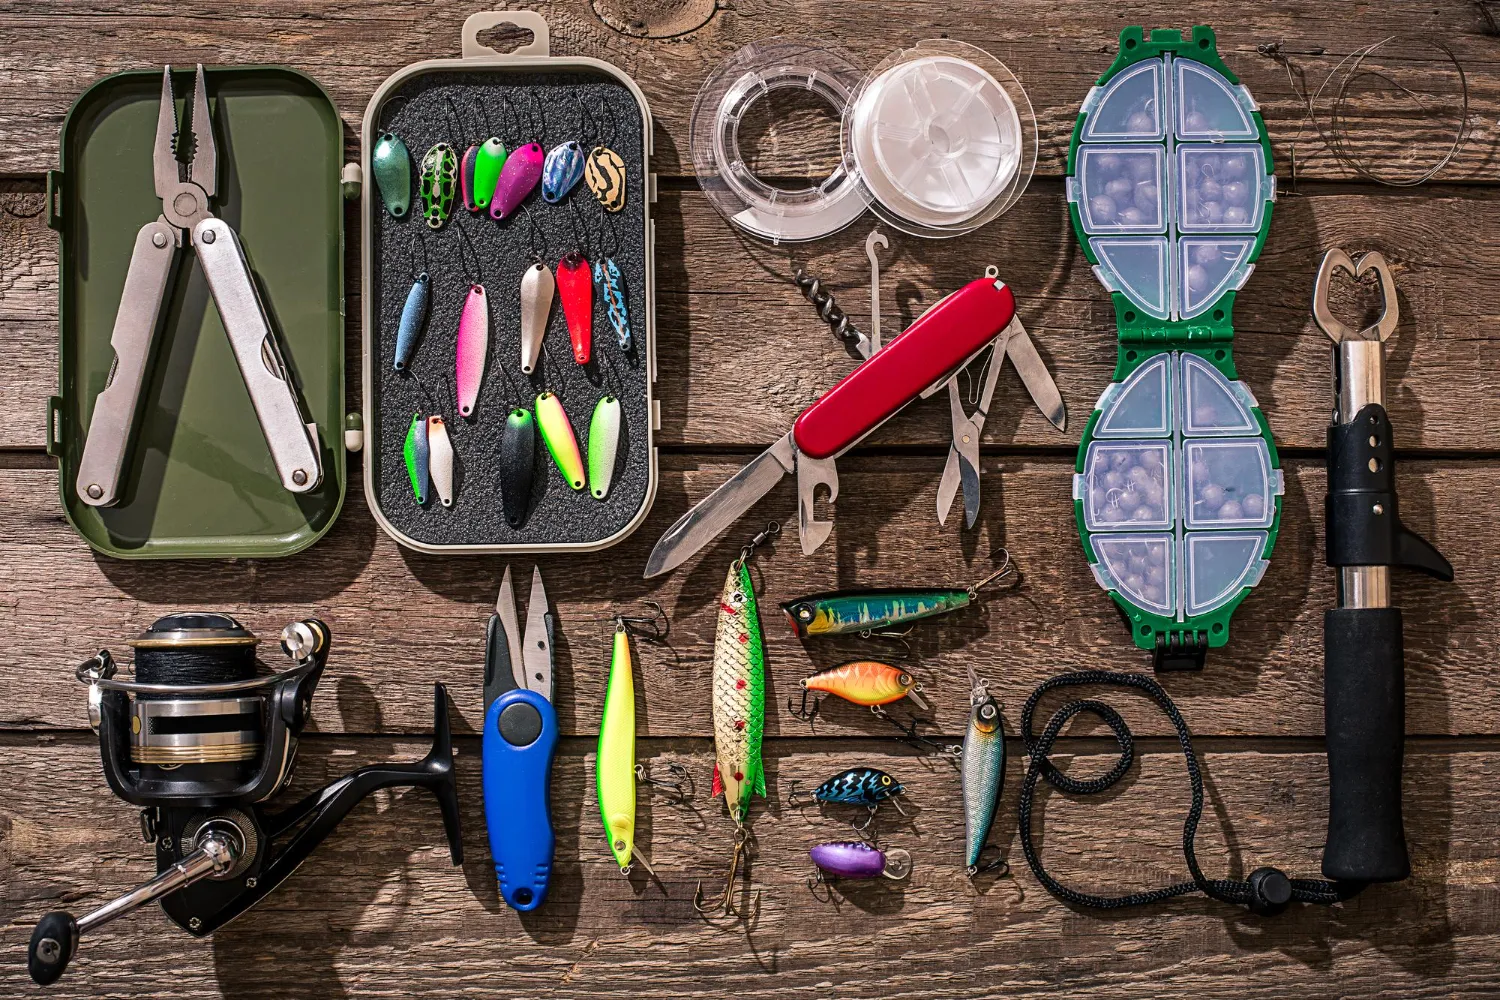 Fly fishing tools and accessories